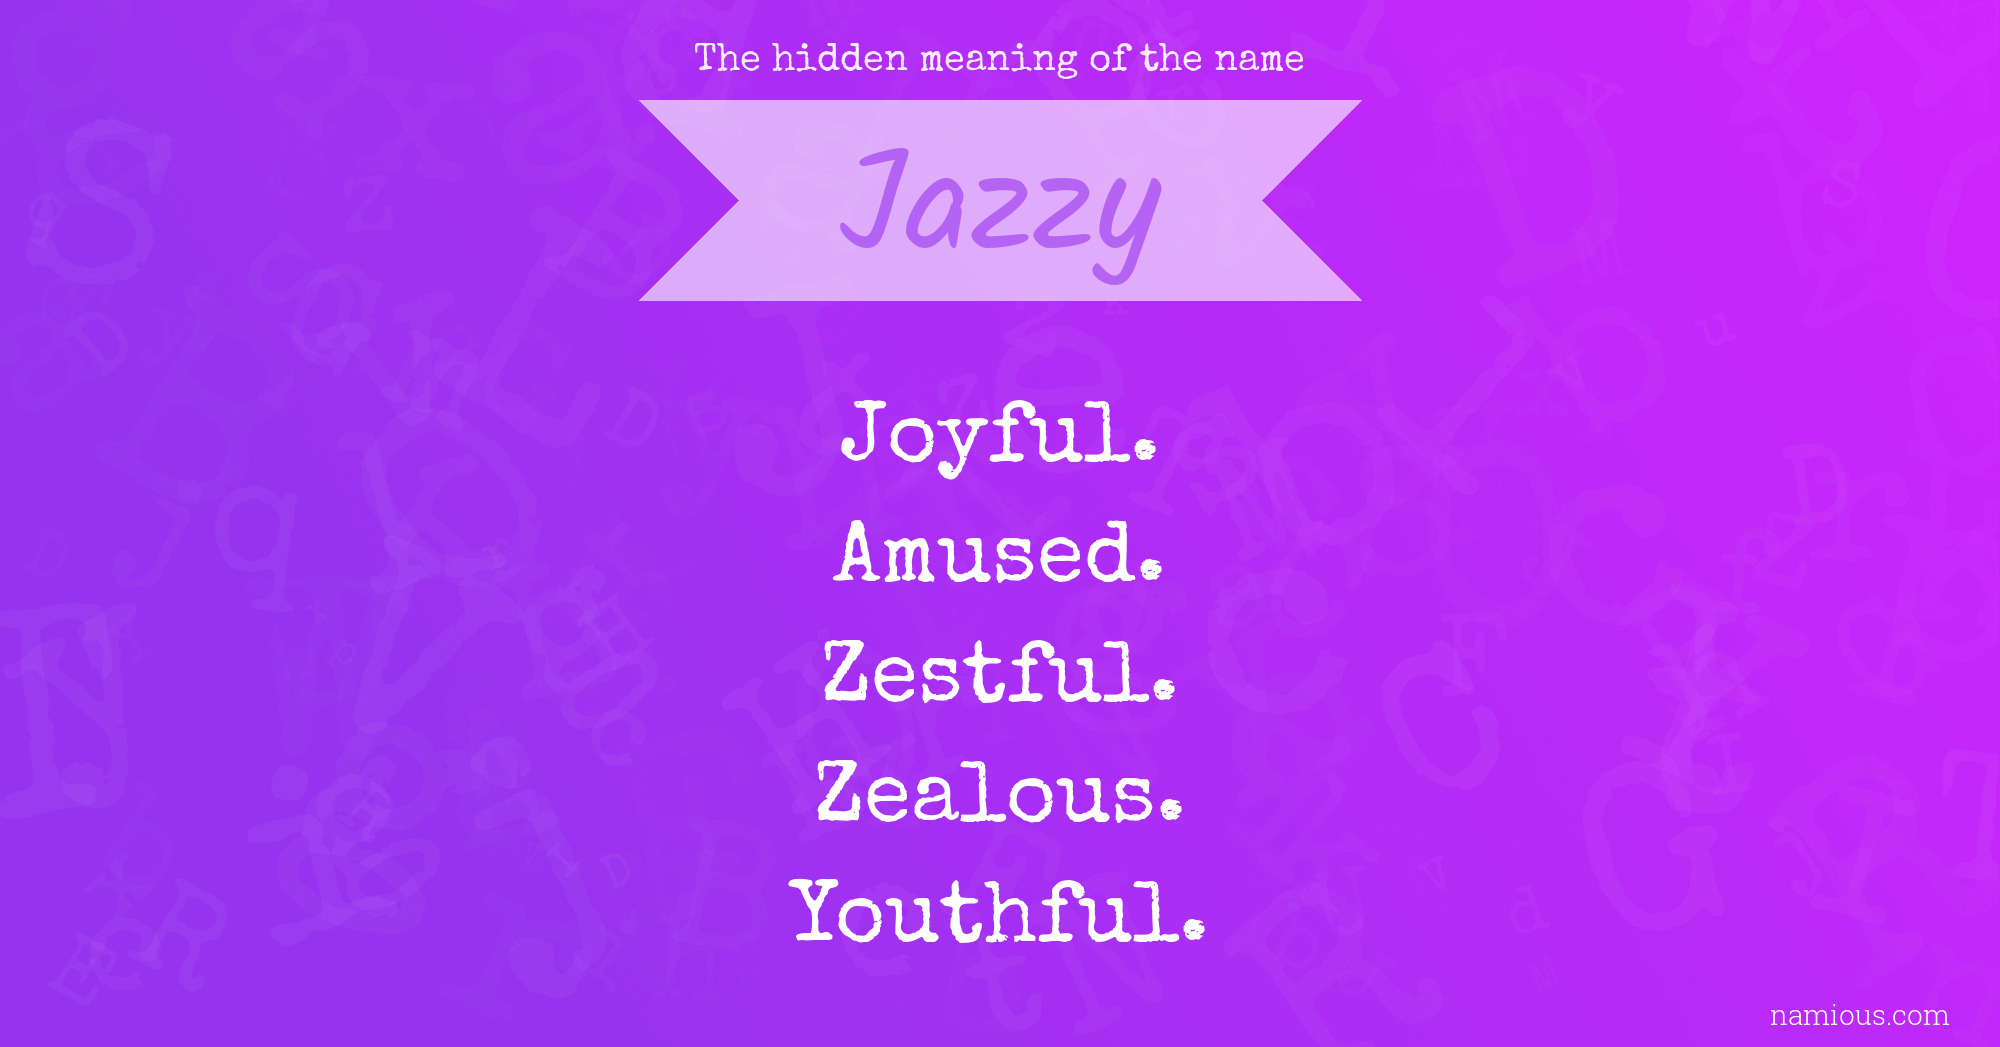 The hidden meaning of the name Jazzy